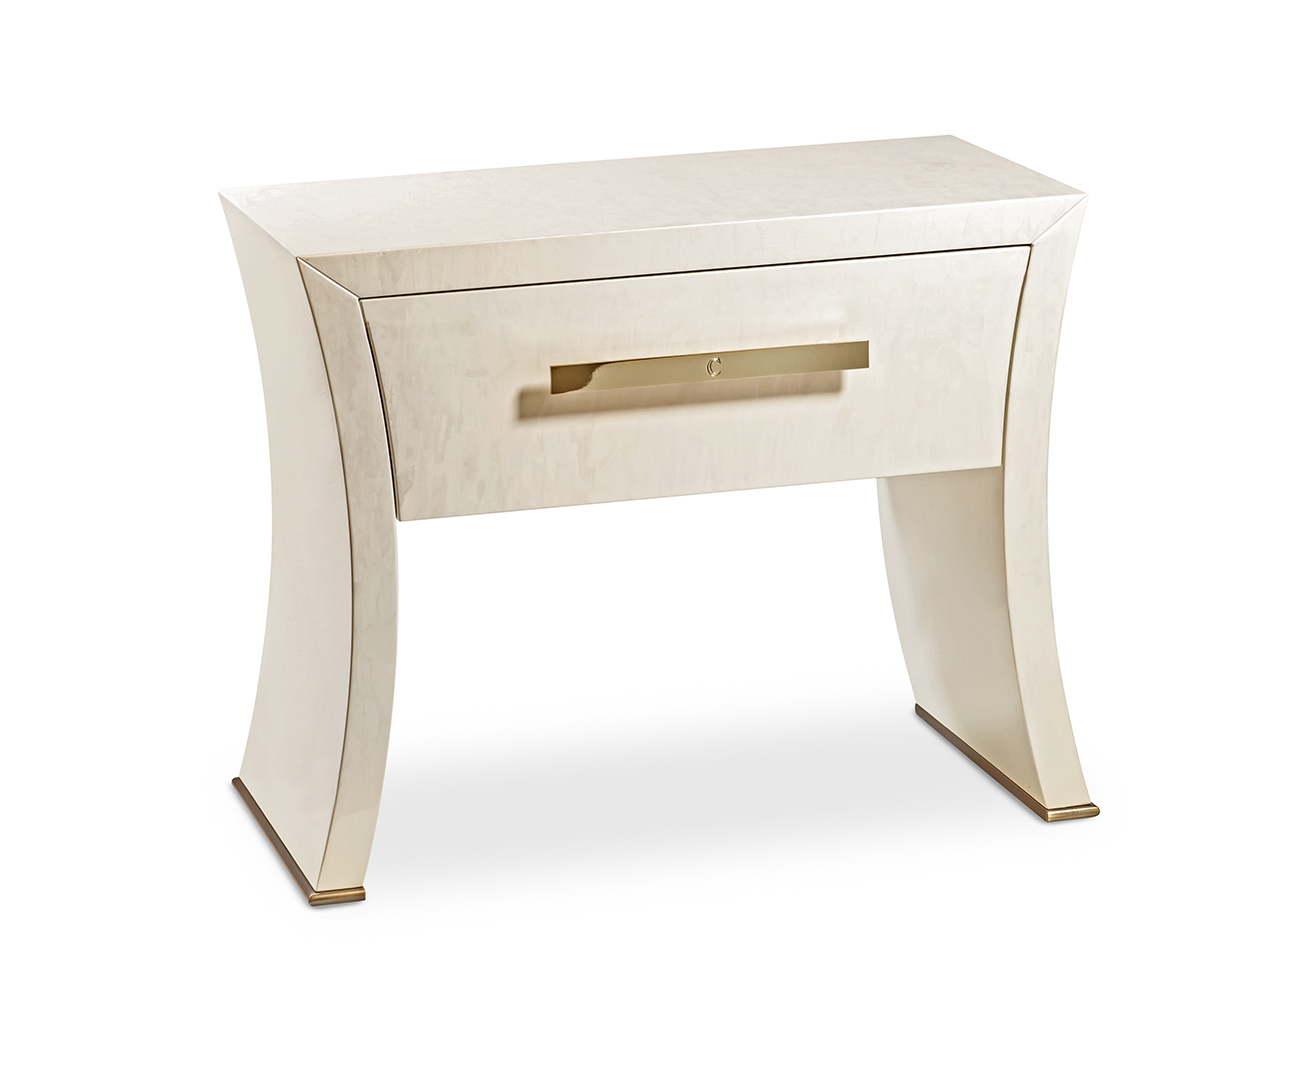 Richard New bedside table - Cantori